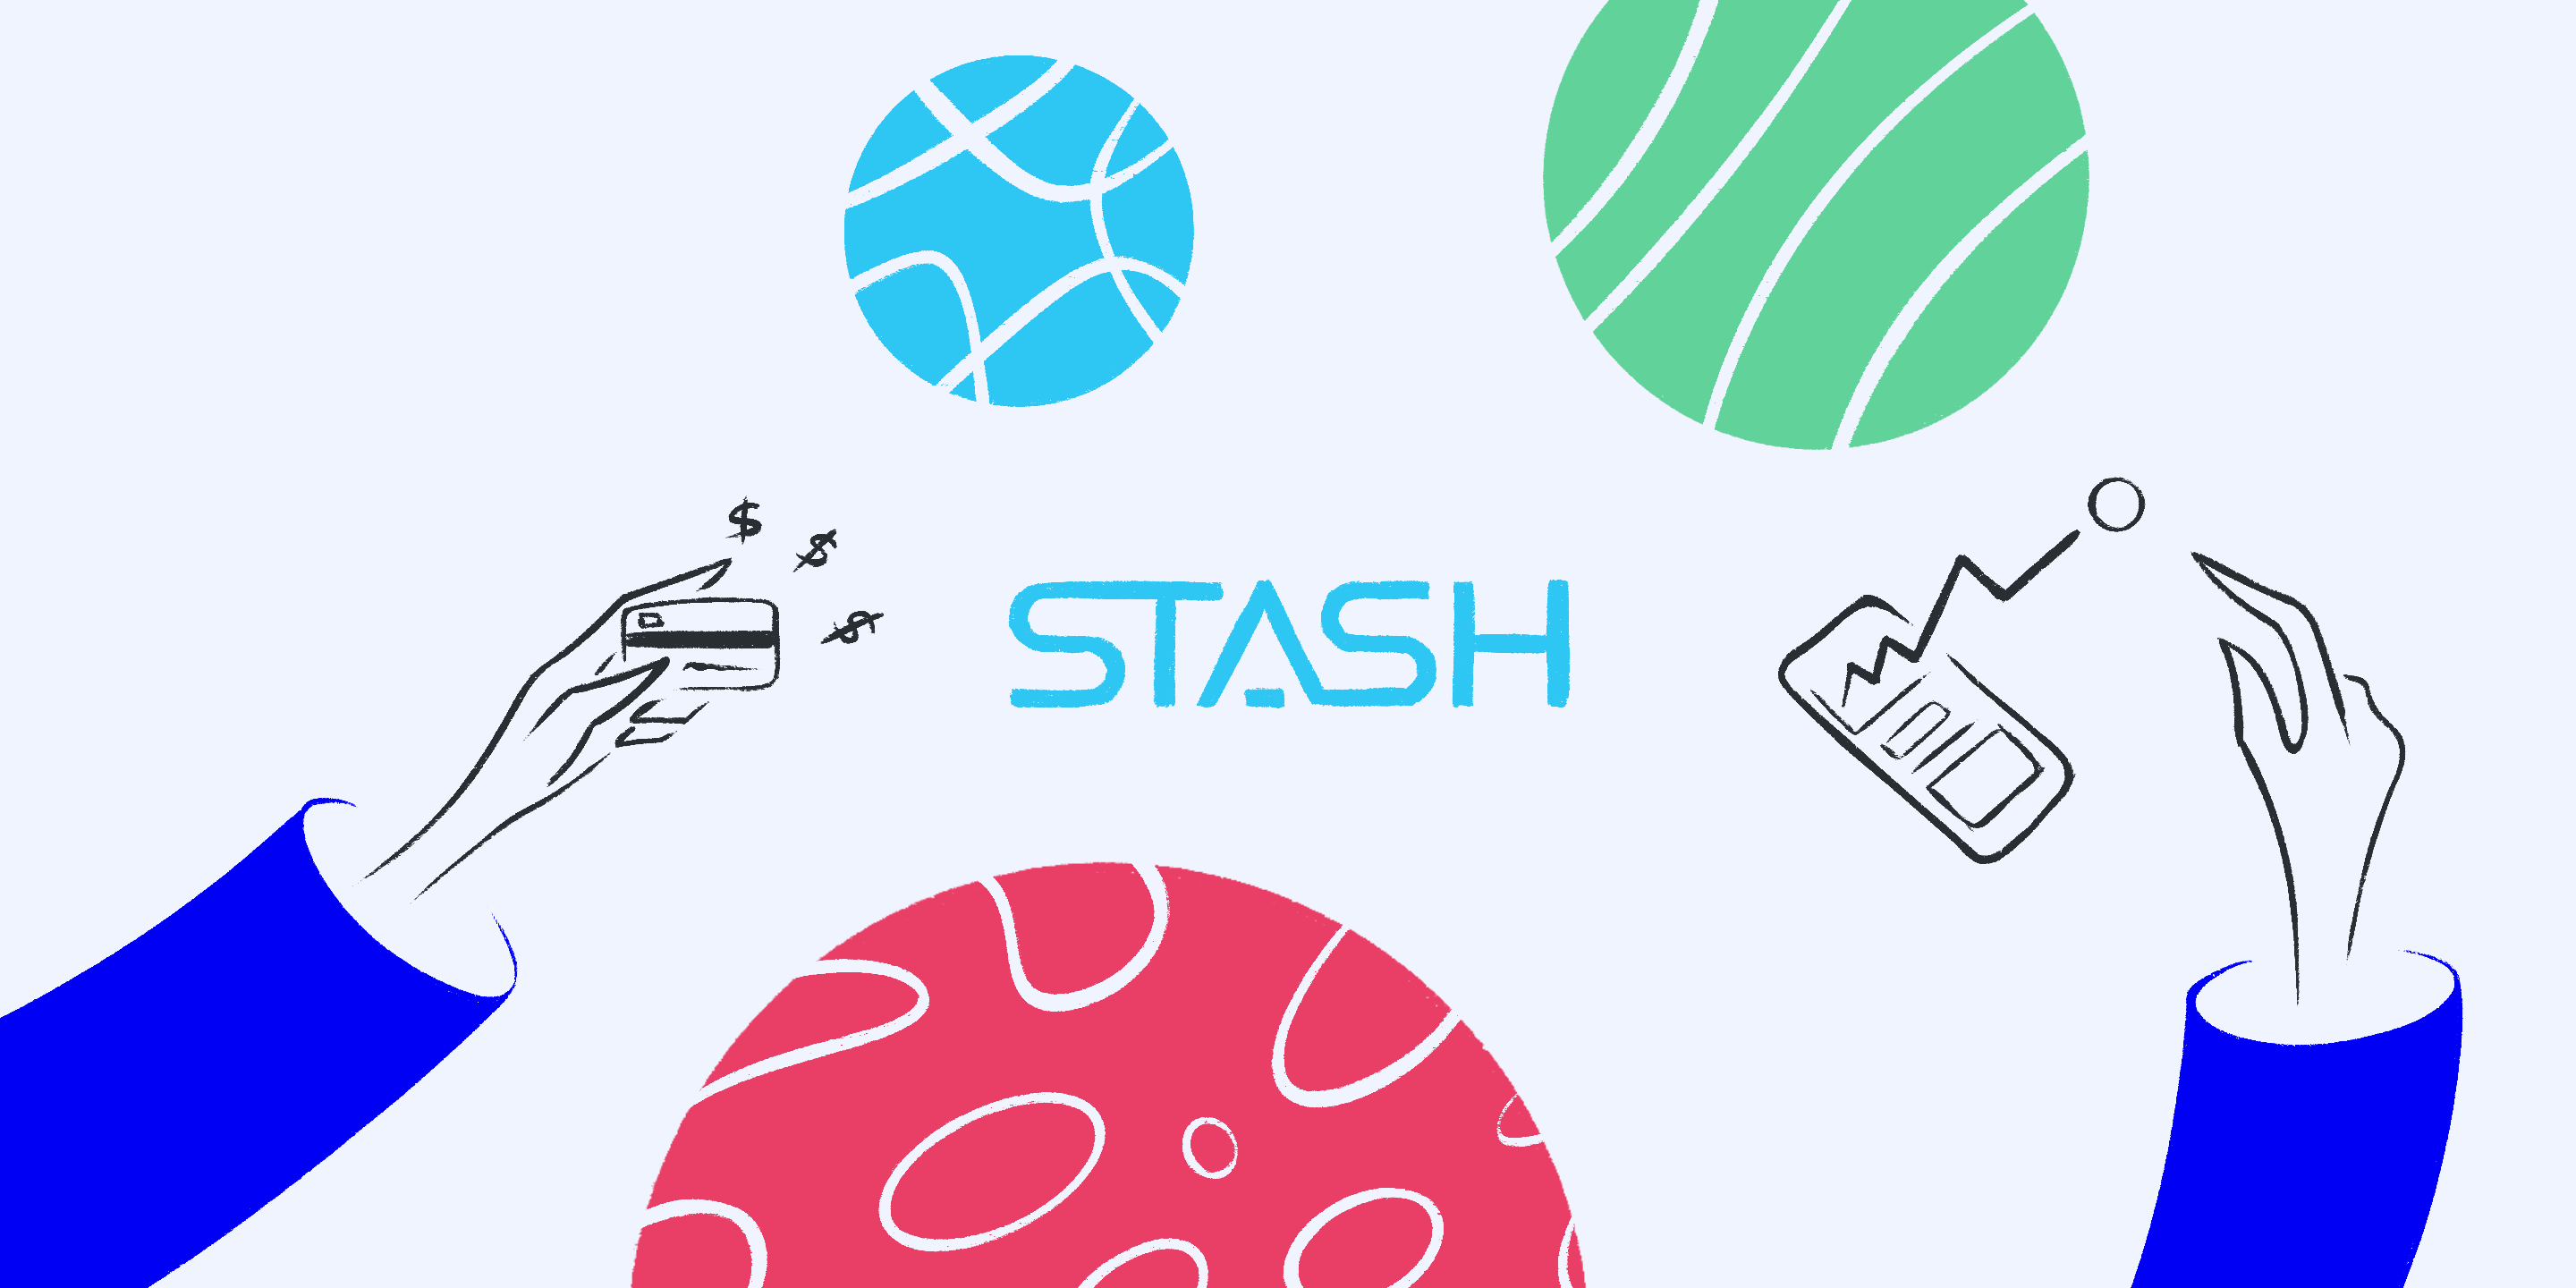 stash-raises-40-million-in-funding-and-plans-for-ipo